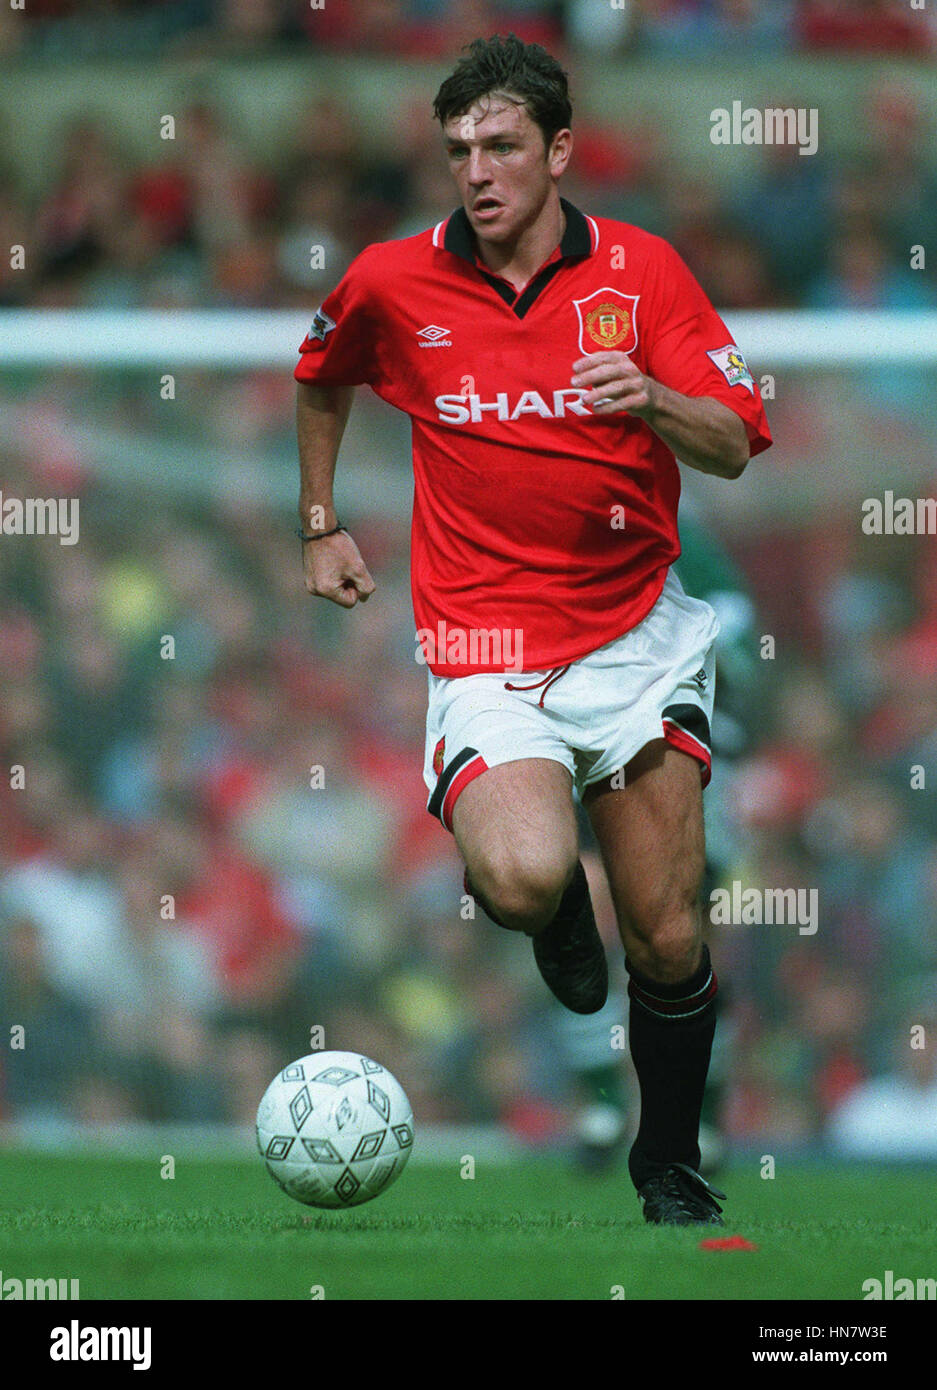 Lee Sharpe All 36 Goals And 43 Assists For Manchester United |  